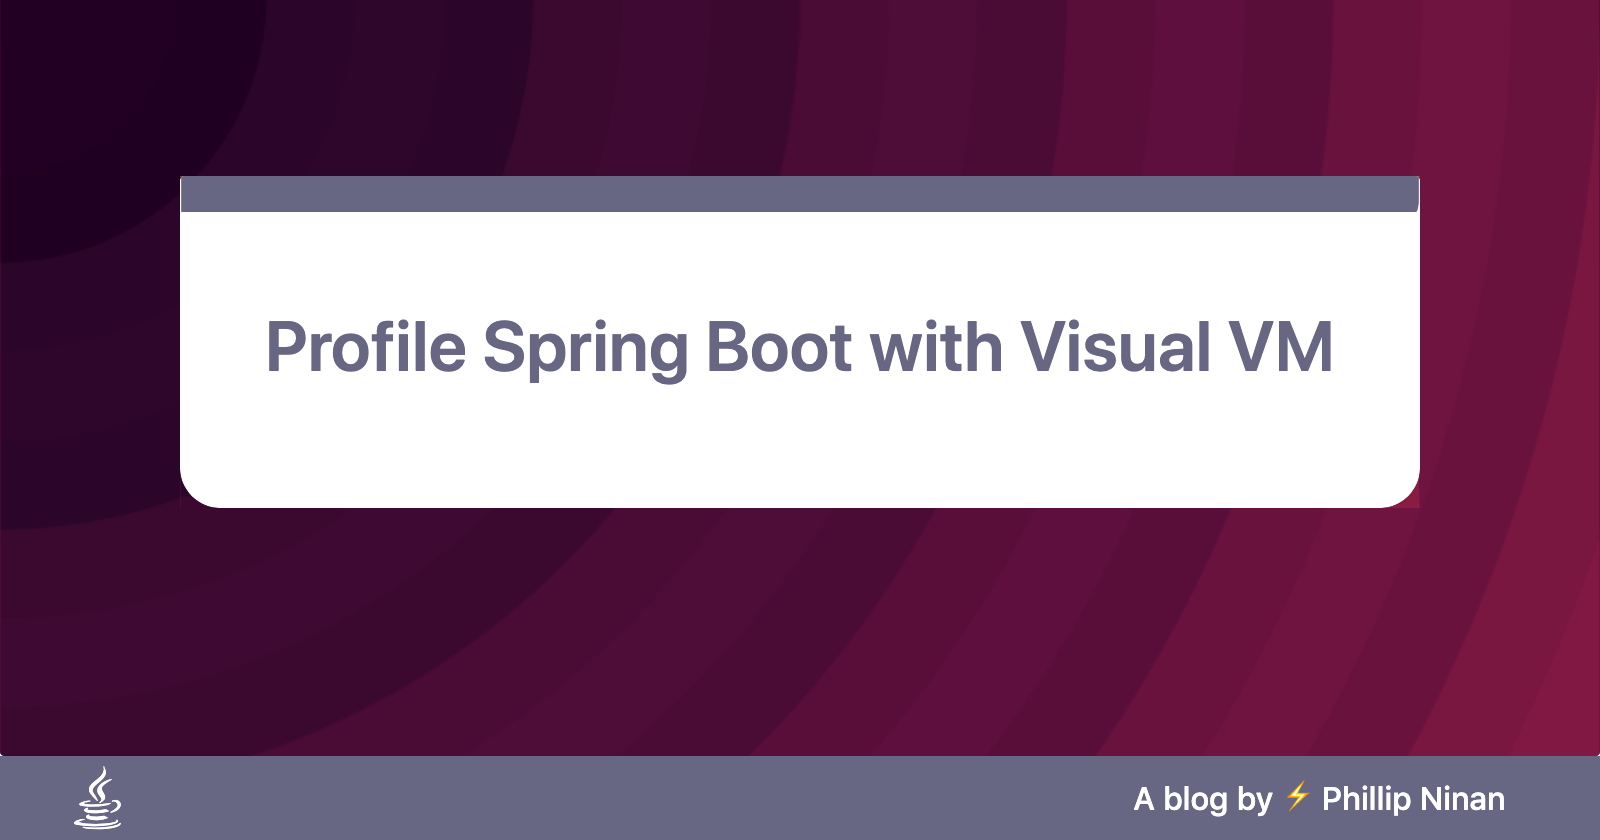 Profile Spring Boot with Visual VM